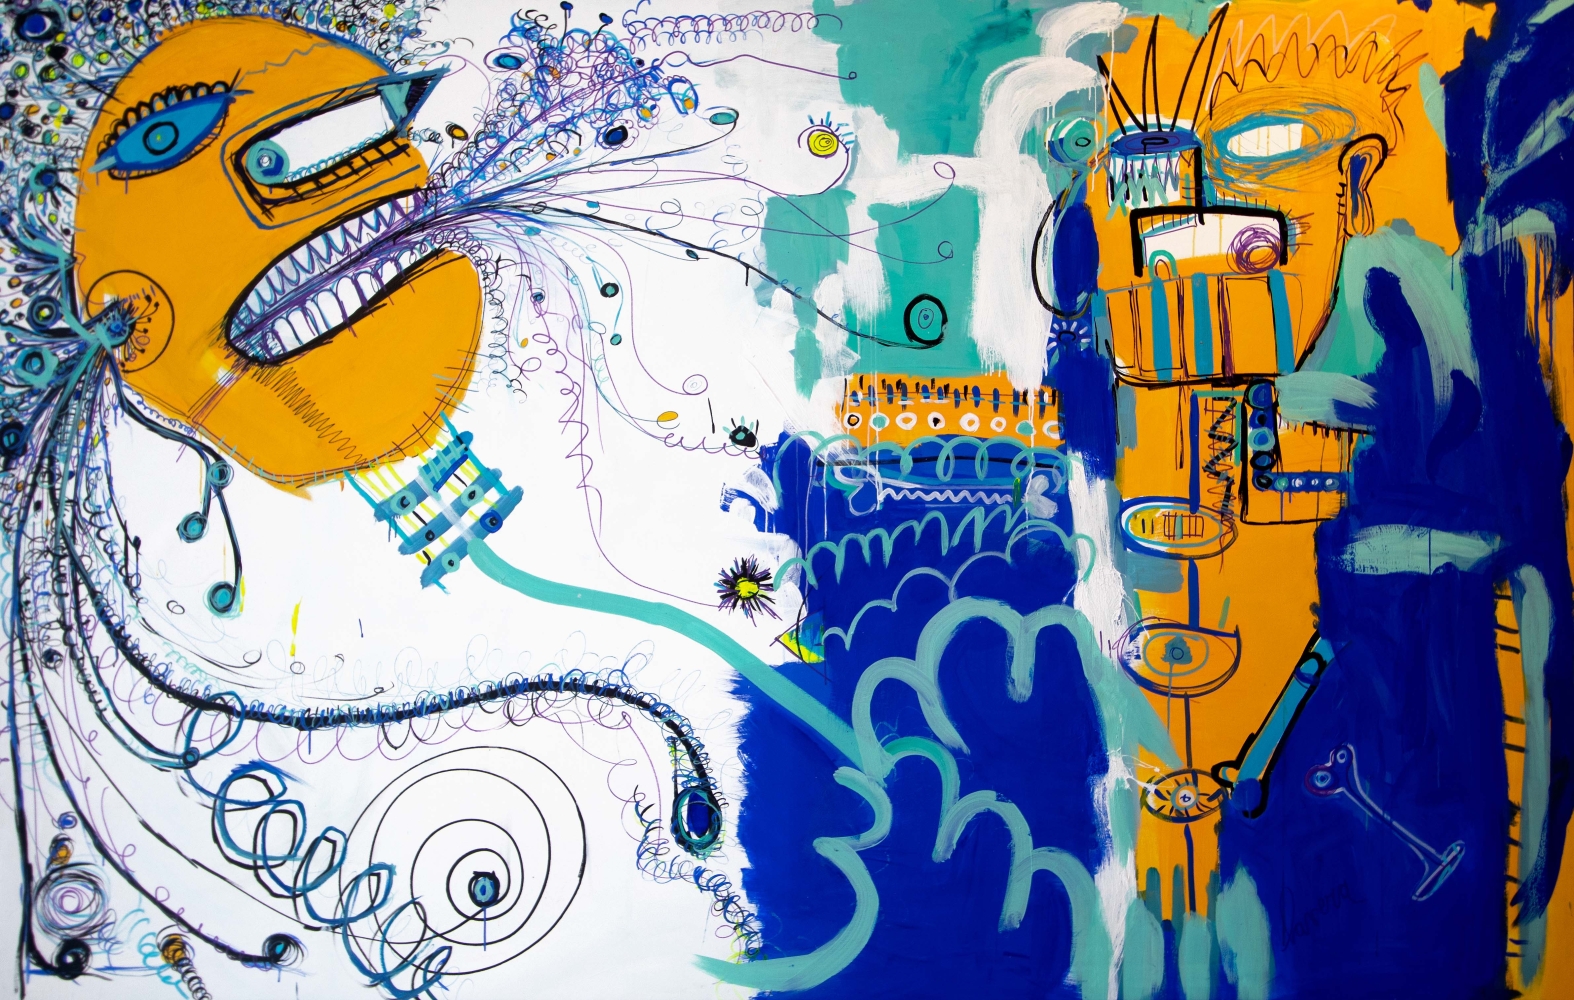 Argentinian artist Fernanda Lavera, Dimelo, 2019, Acrylic, Oil, Marker and Crayon on canvas, 79 x 126 inches, graffiti and street art at manolis projects gallery, Miami.